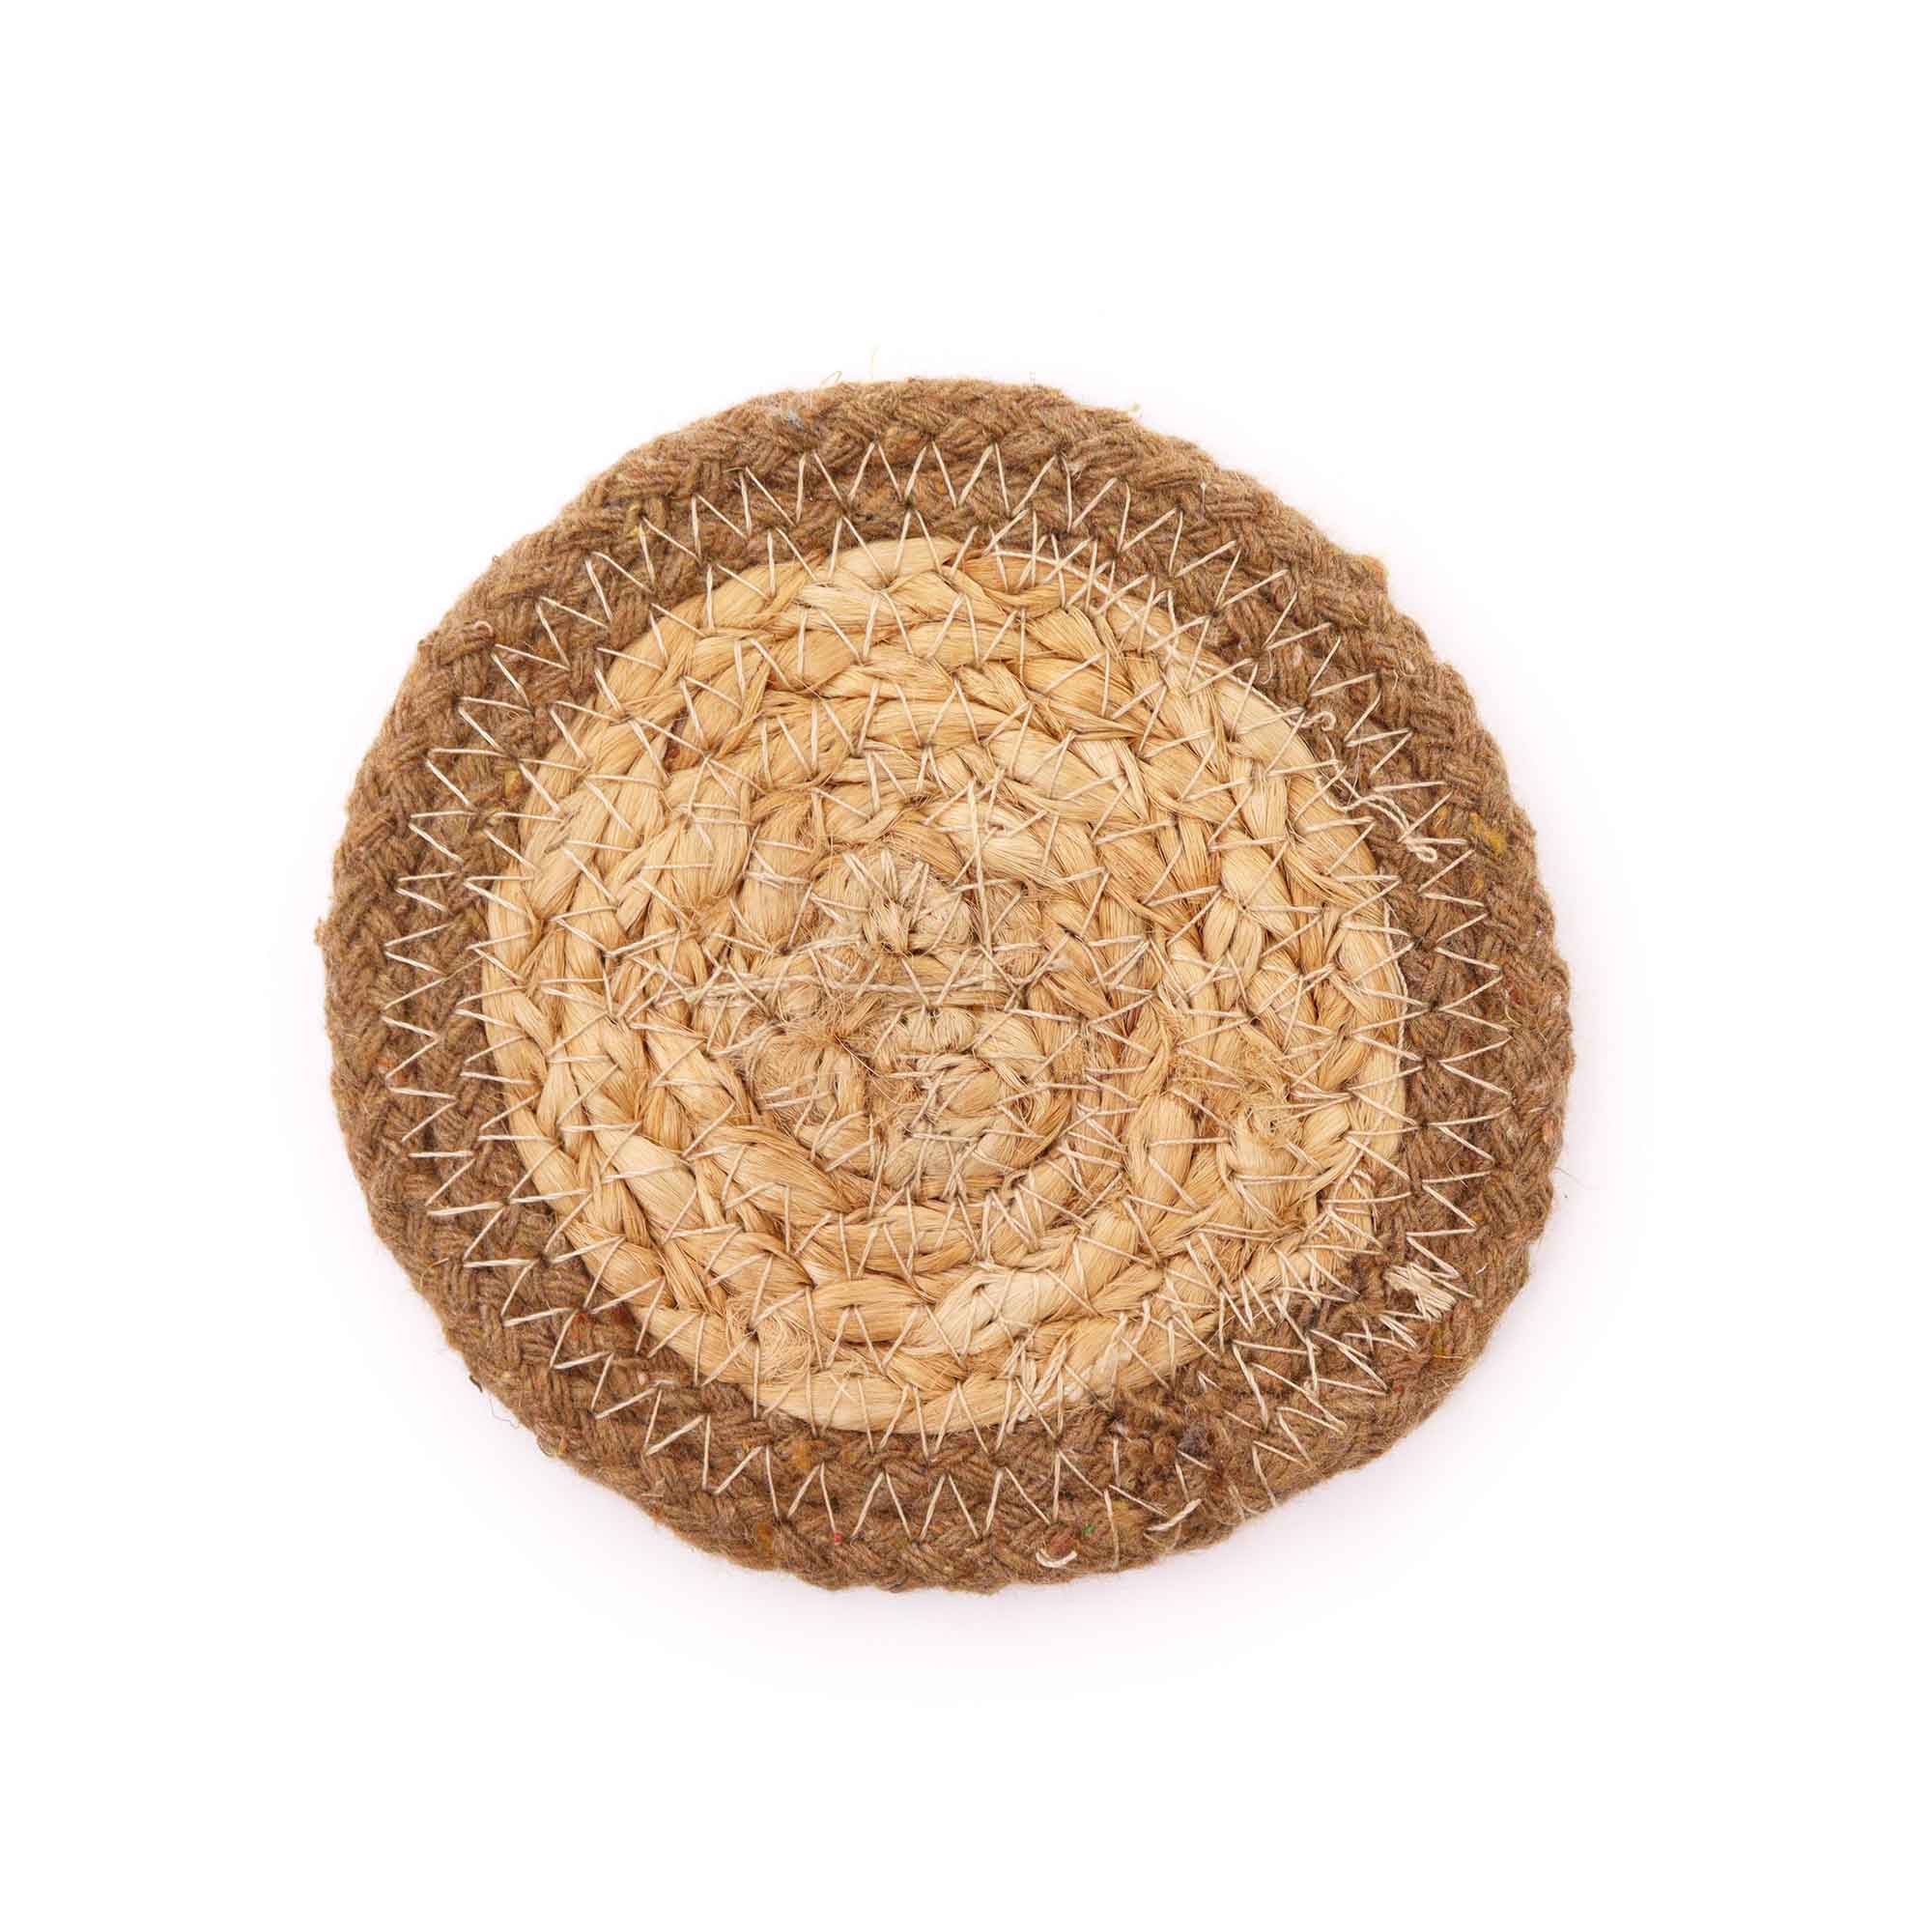 View Natural Coaster Jute Cotton 10cm set of 4 Natural Boarder information